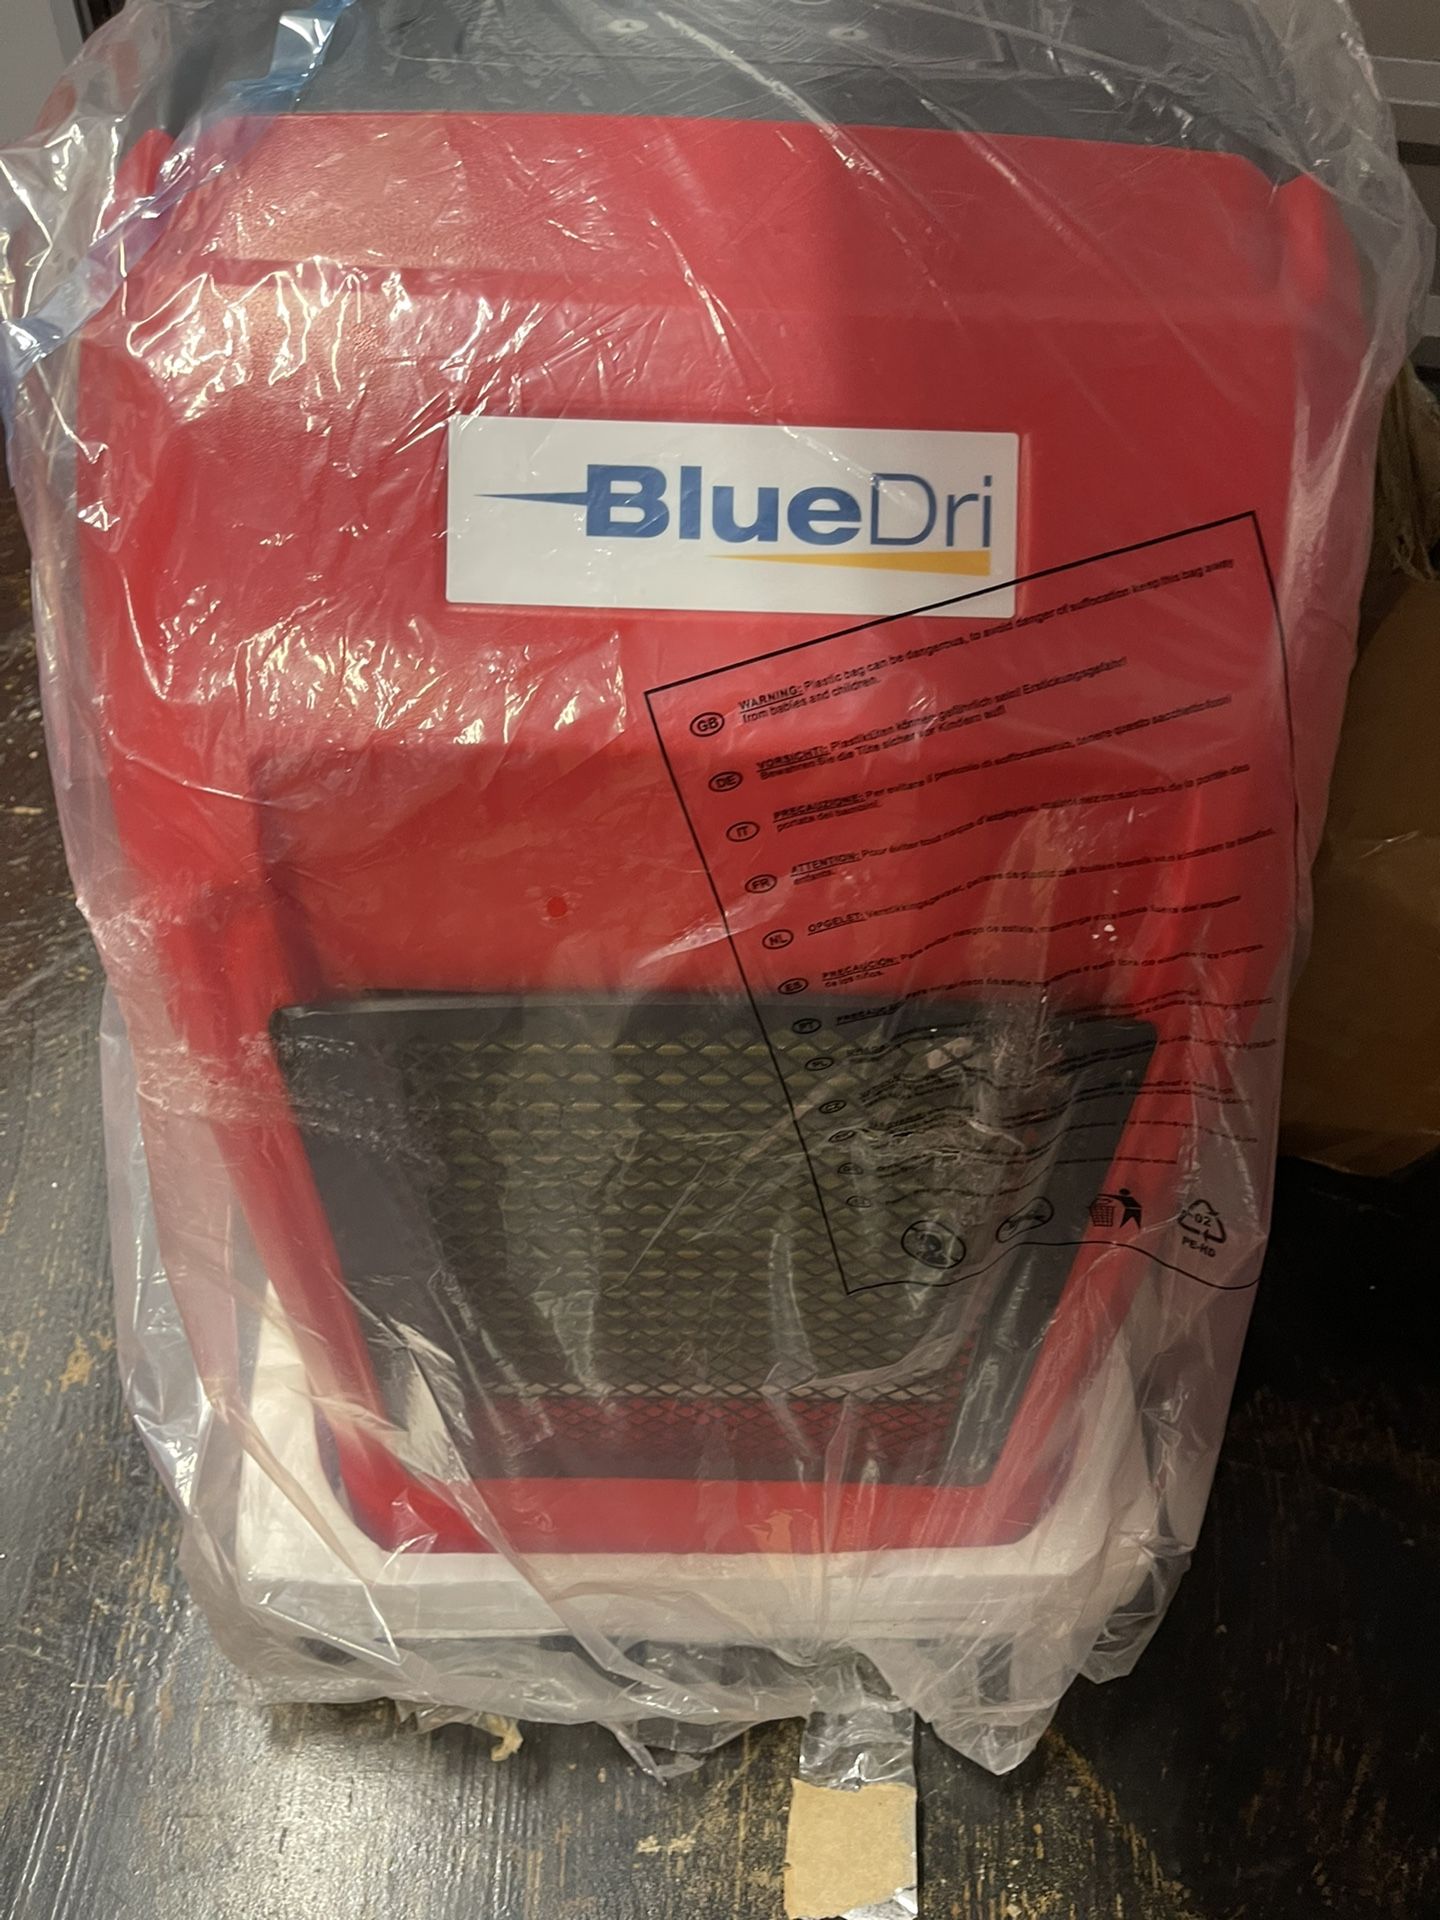 BlueDri BD-76P BL Industrial Commercial Dehumidifier with Hose for Basements in Homes and Job Sites, Red